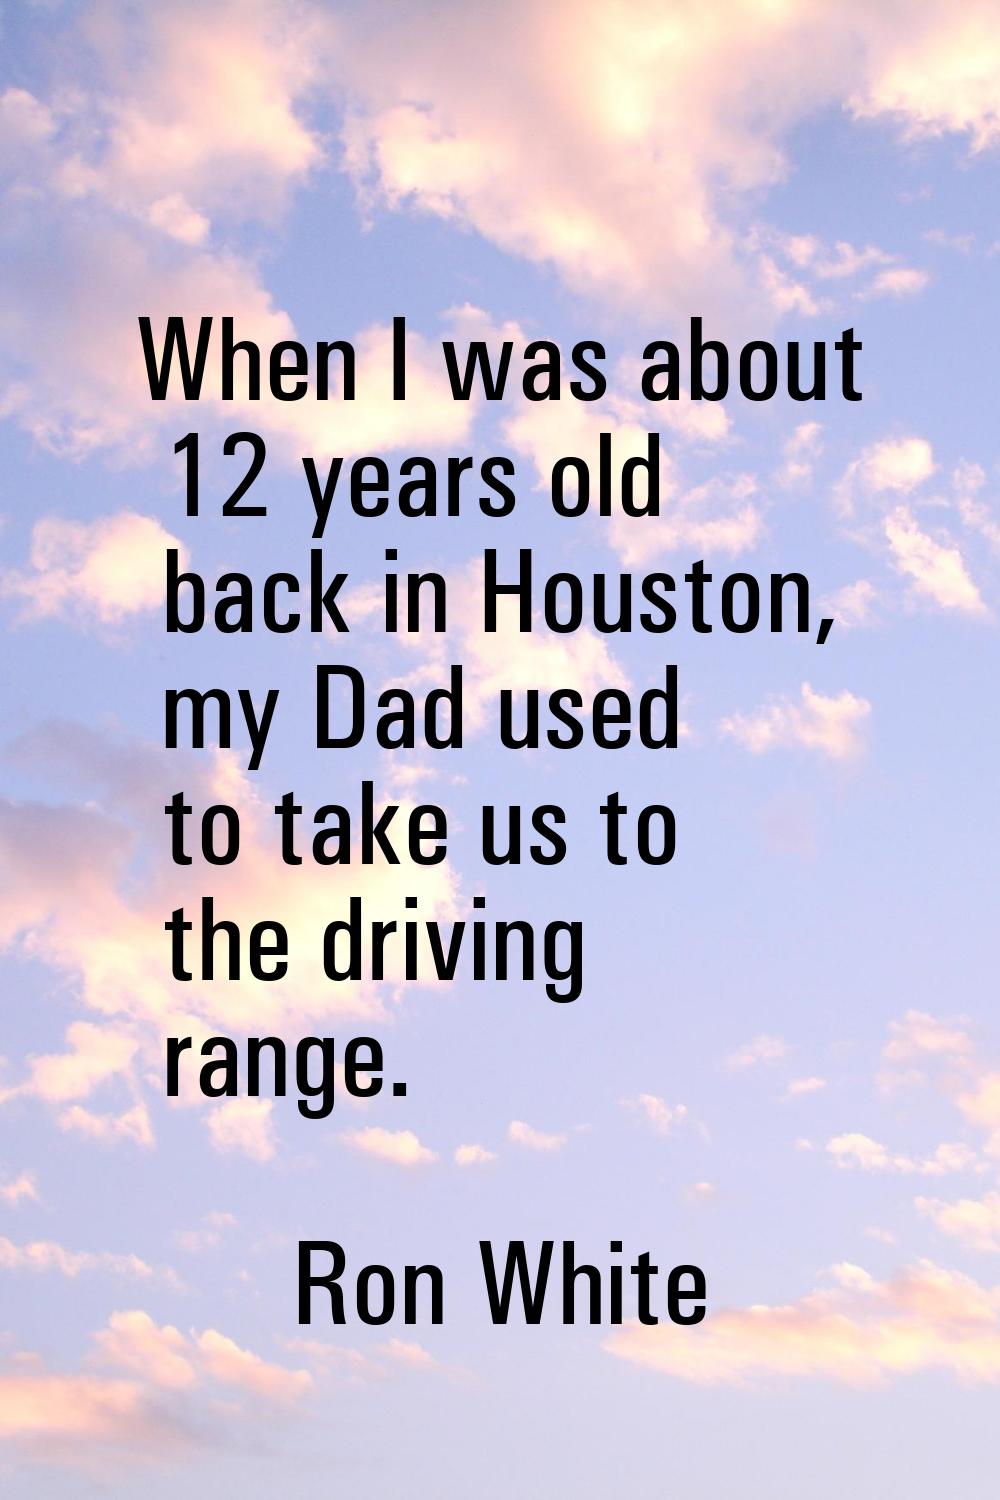 When I was about 12 years old back in Houston, my Dad used to take us to the driving range.